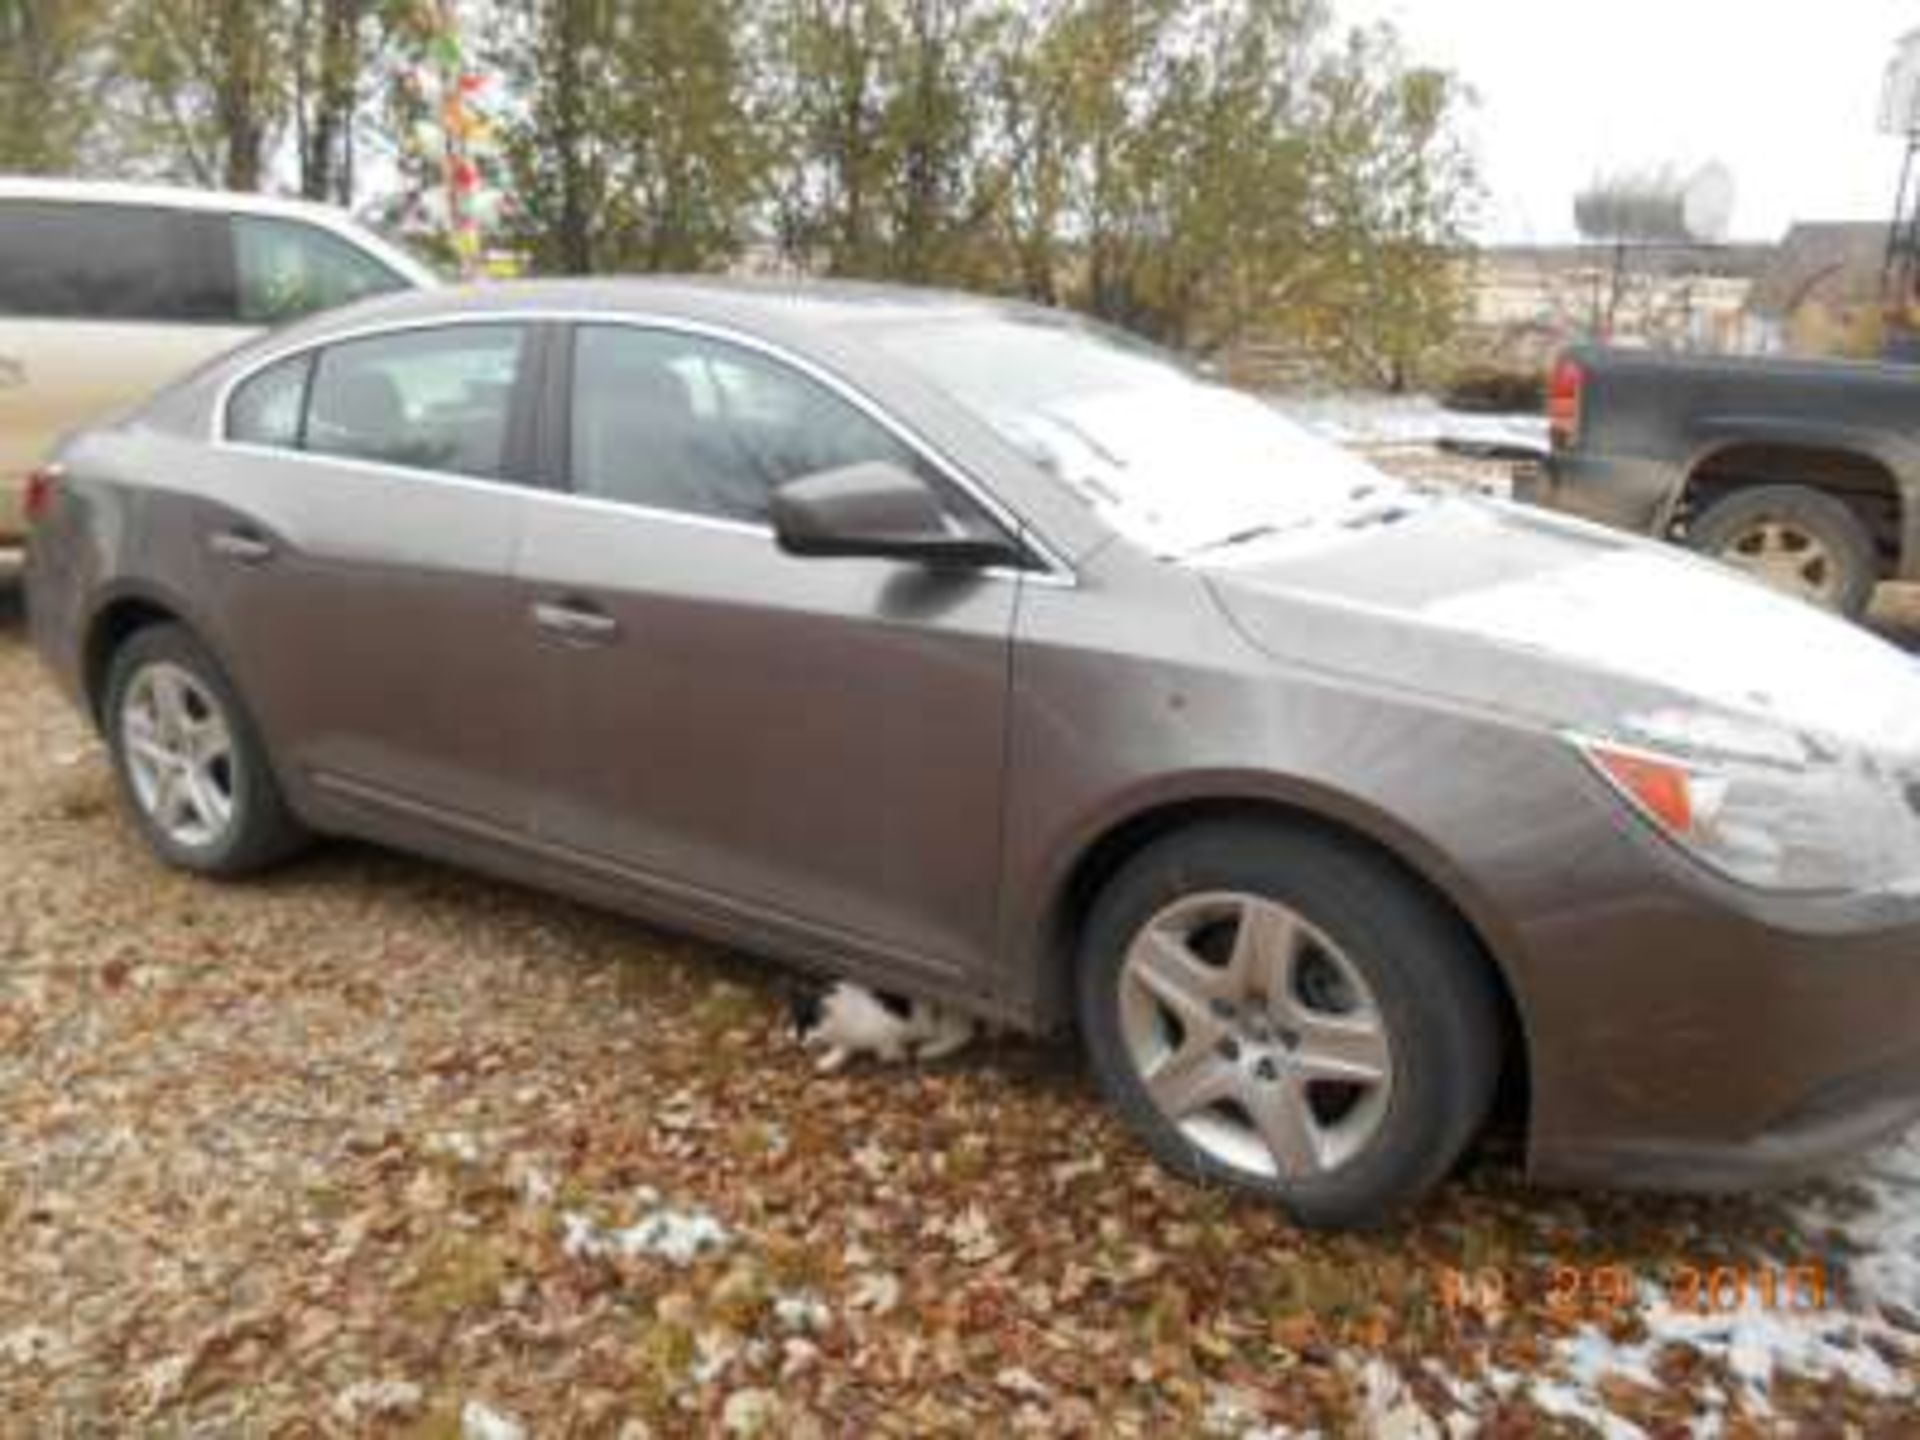 2010 Buick Lacrosse: 4cyl, fully loaded, auto, low km new rubber - Image 2 of 2